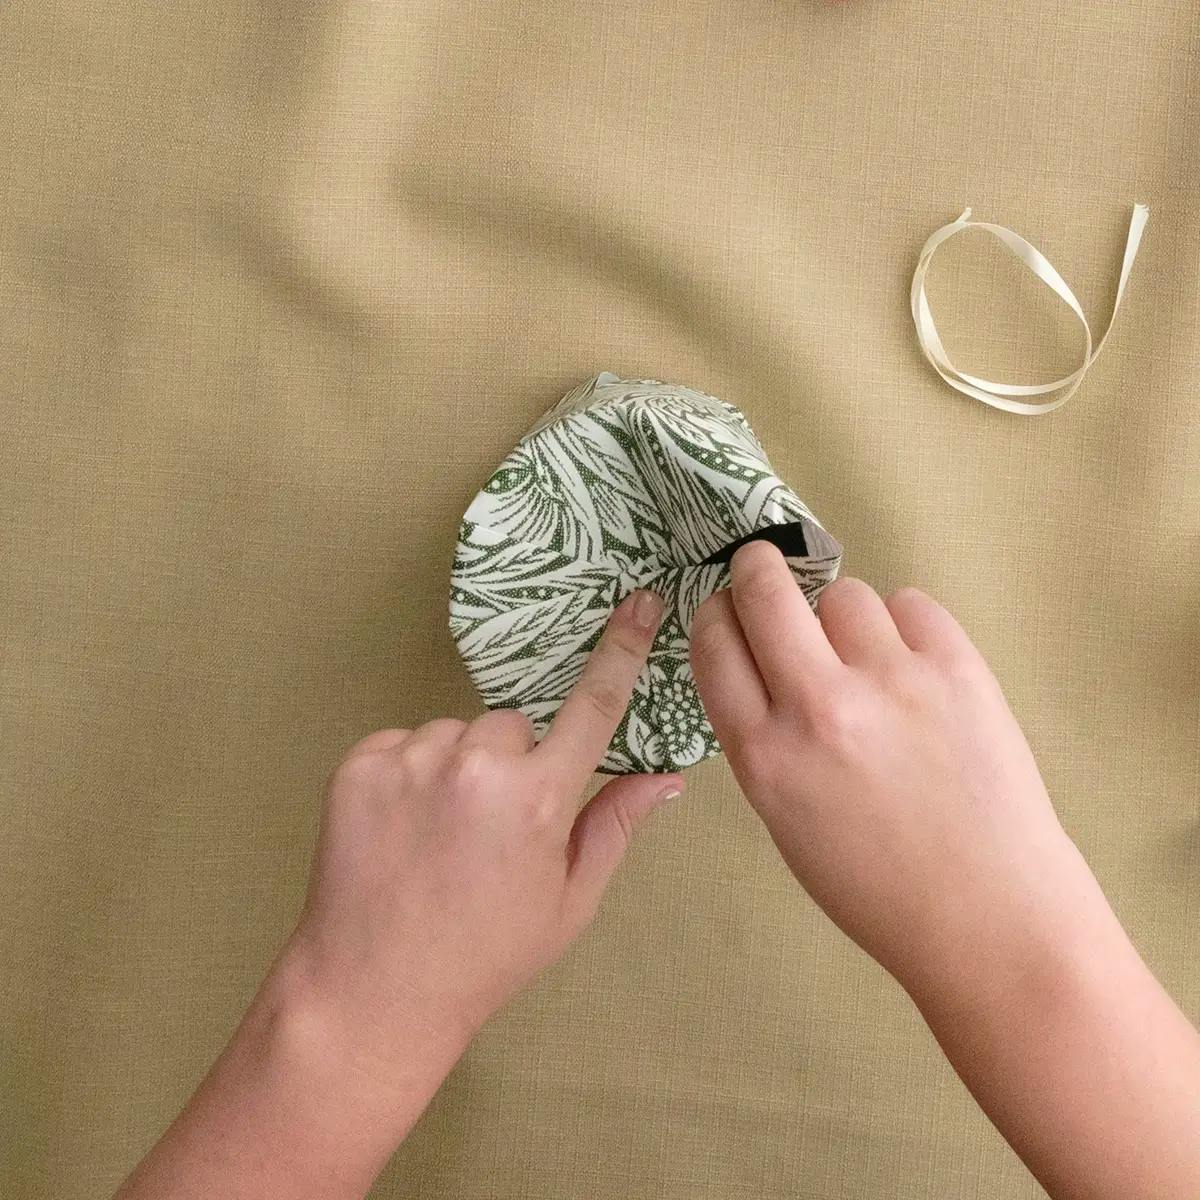 Making pleats in the wrapping paper at the top of a candle or cylinder.